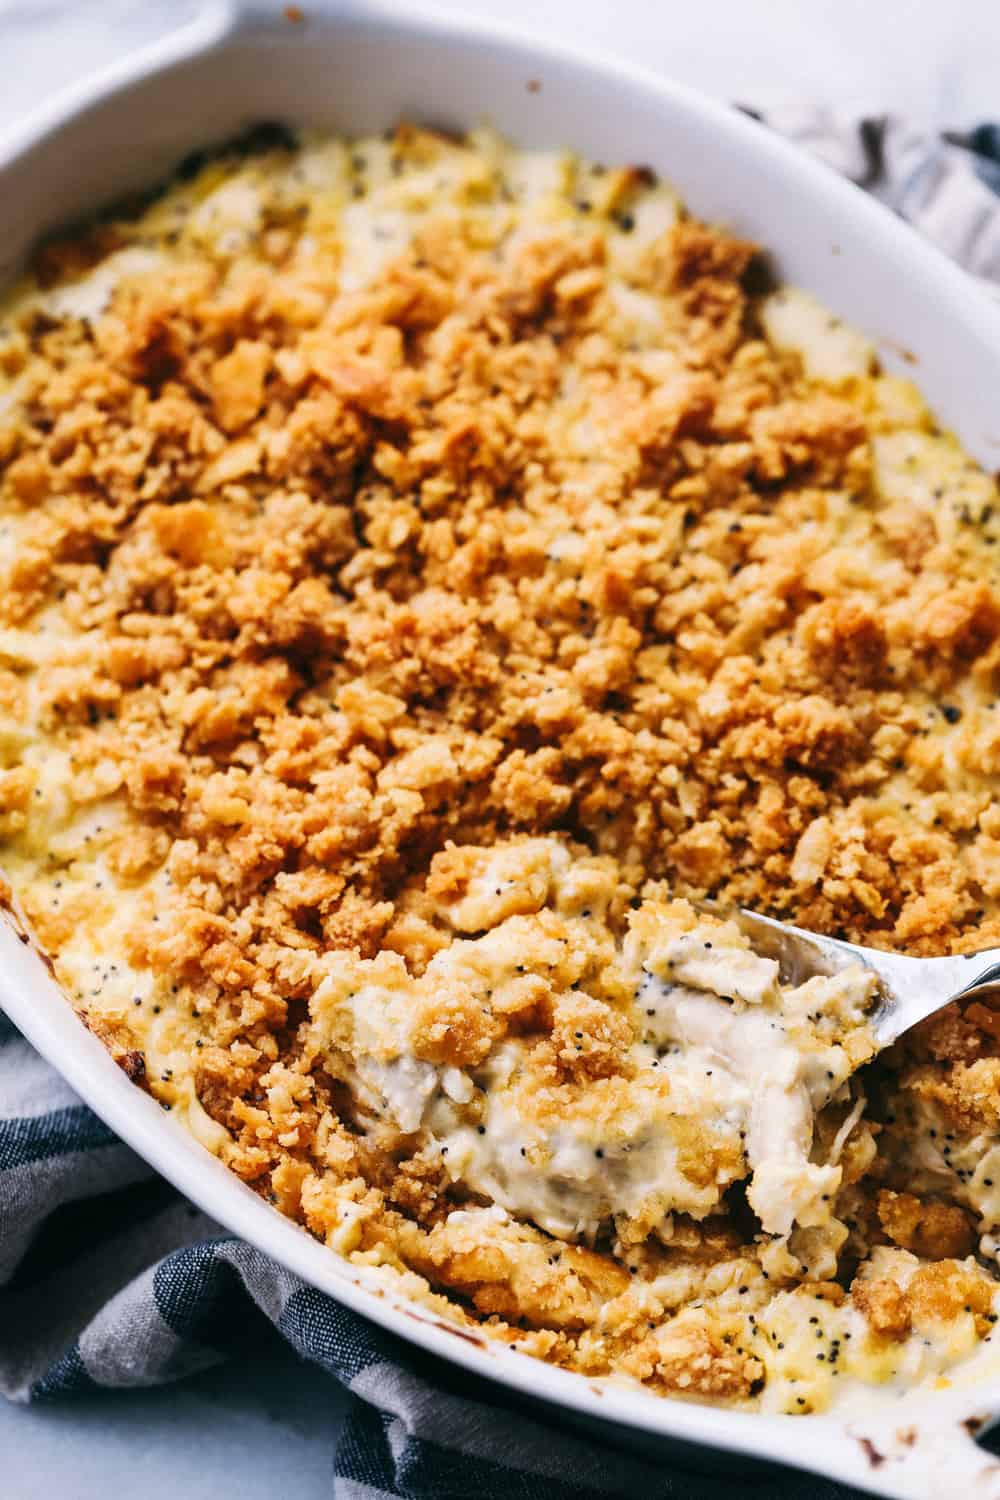 Poppy Seed Chicken Casserole With Rice
 The Very Best Poppy Seed Chicken Casserole